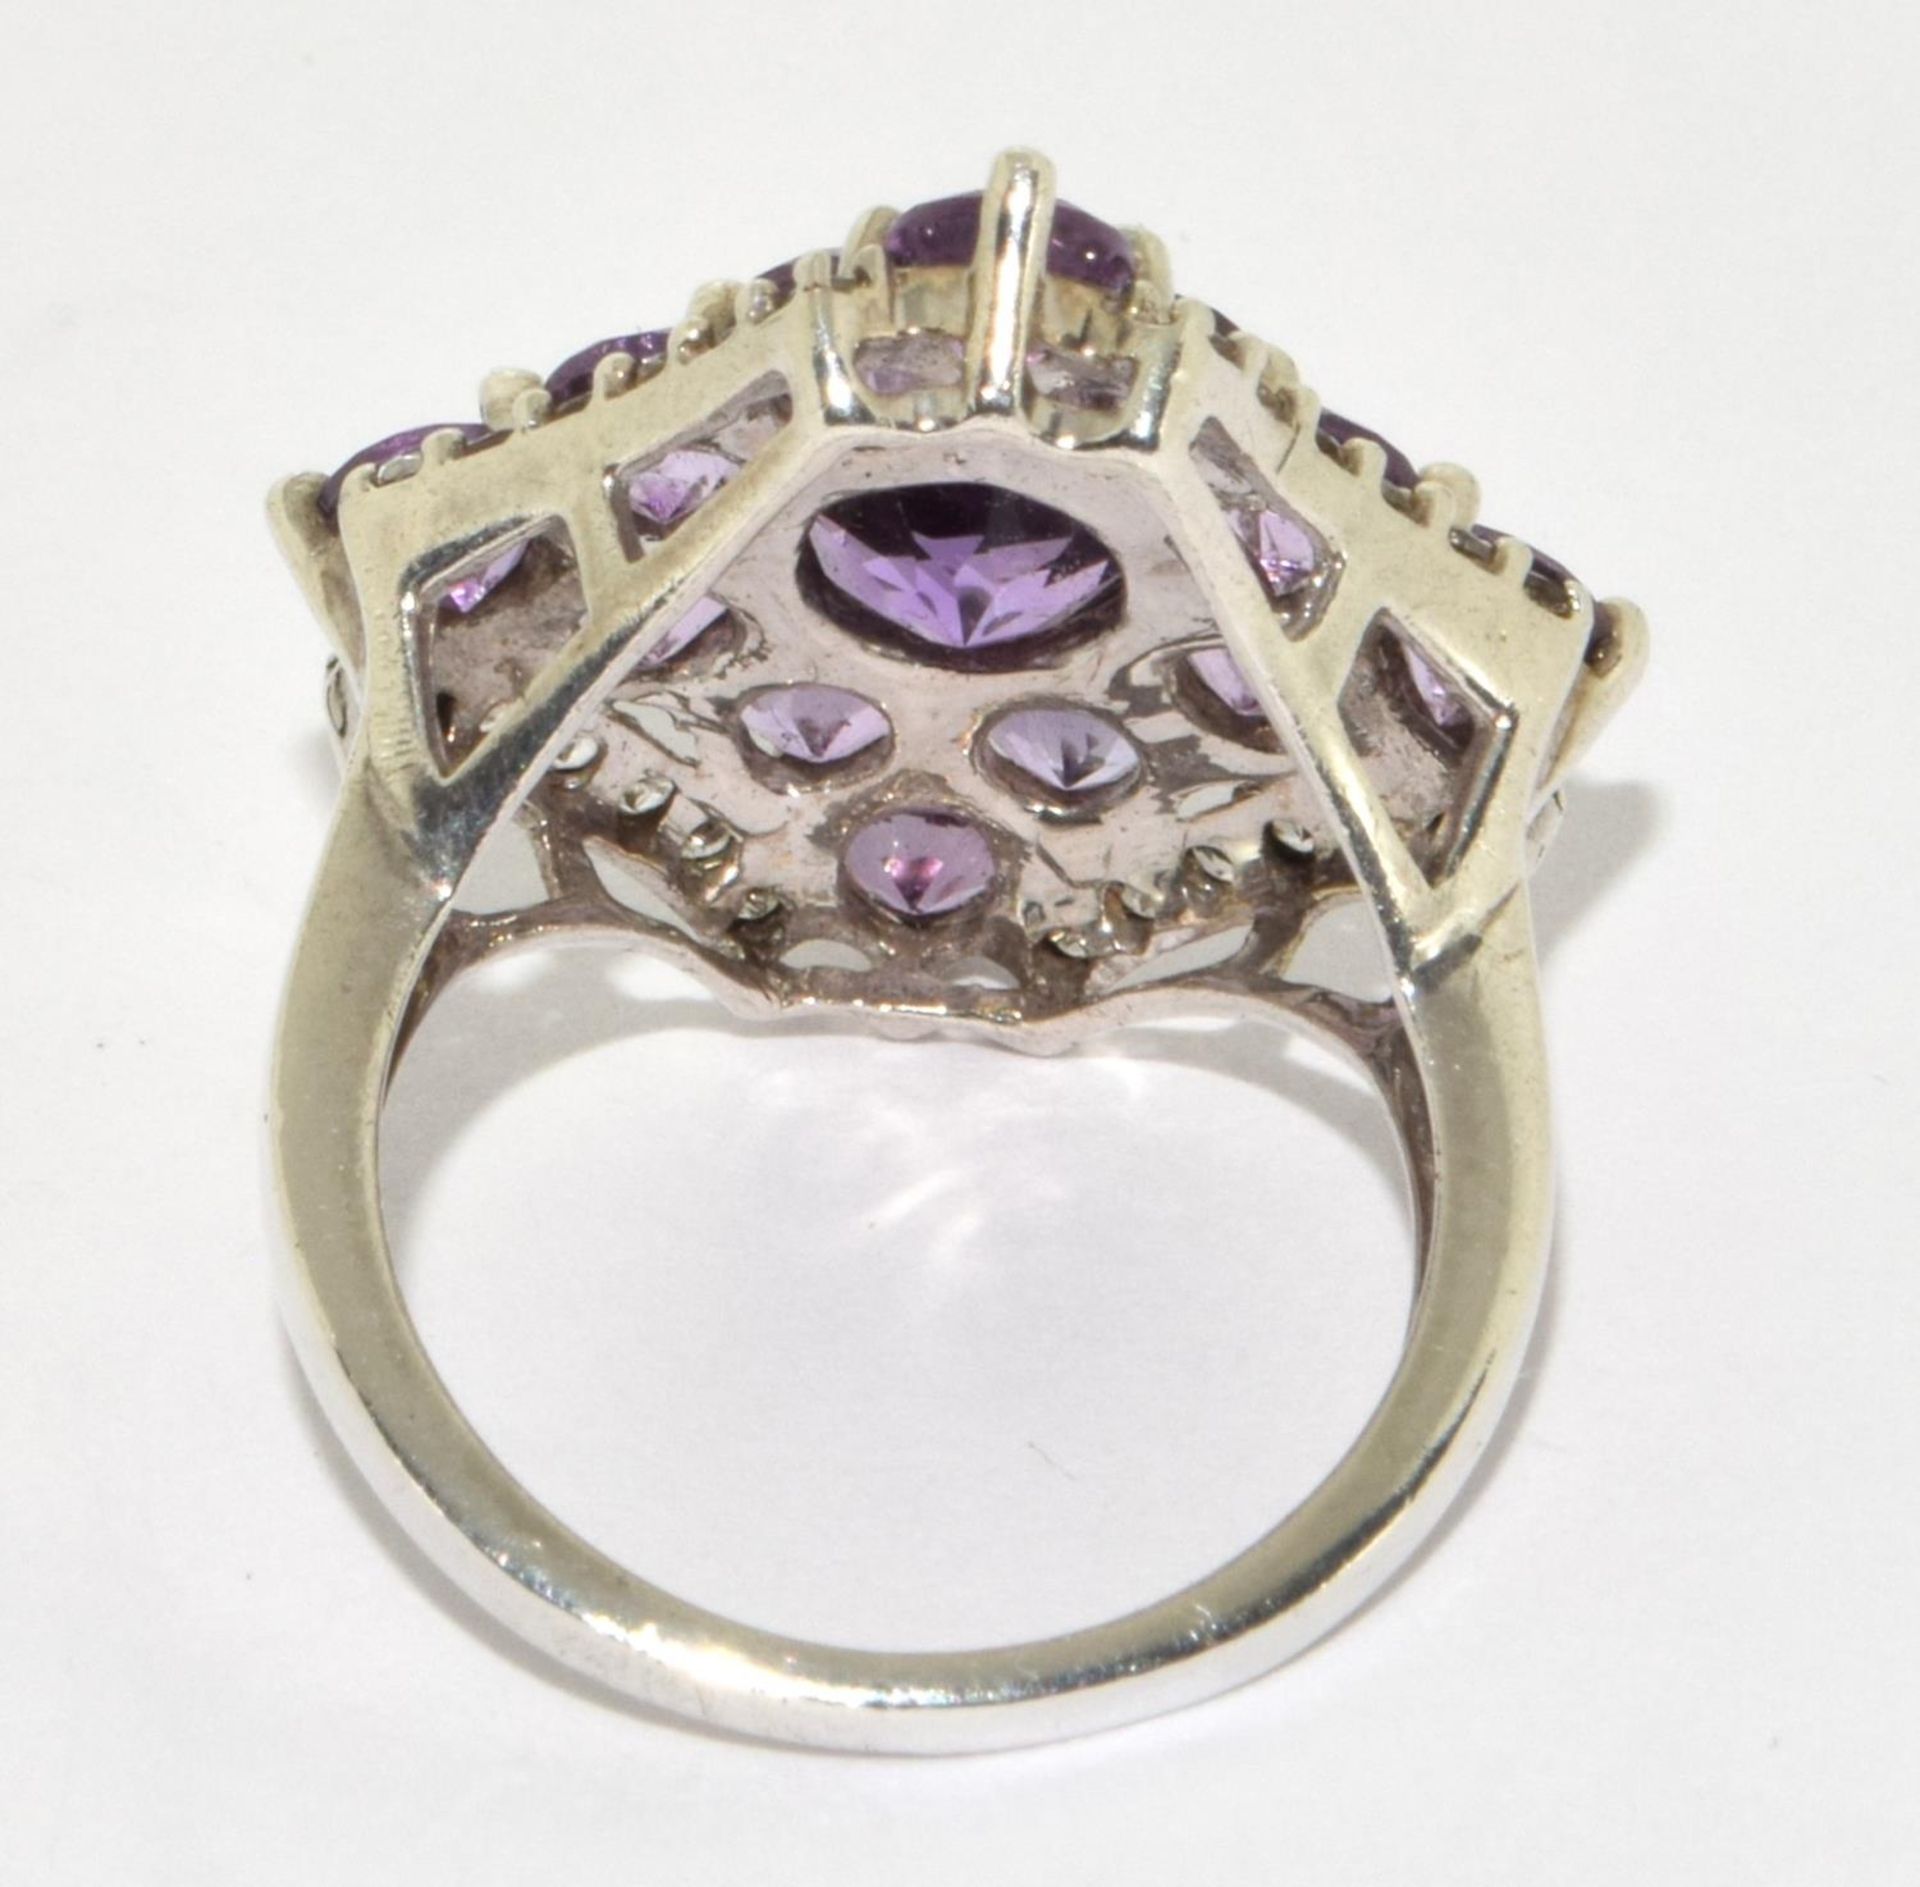 Superb amethyst 925 silver Navette ring Size M 1/2. - Image 3 of 3